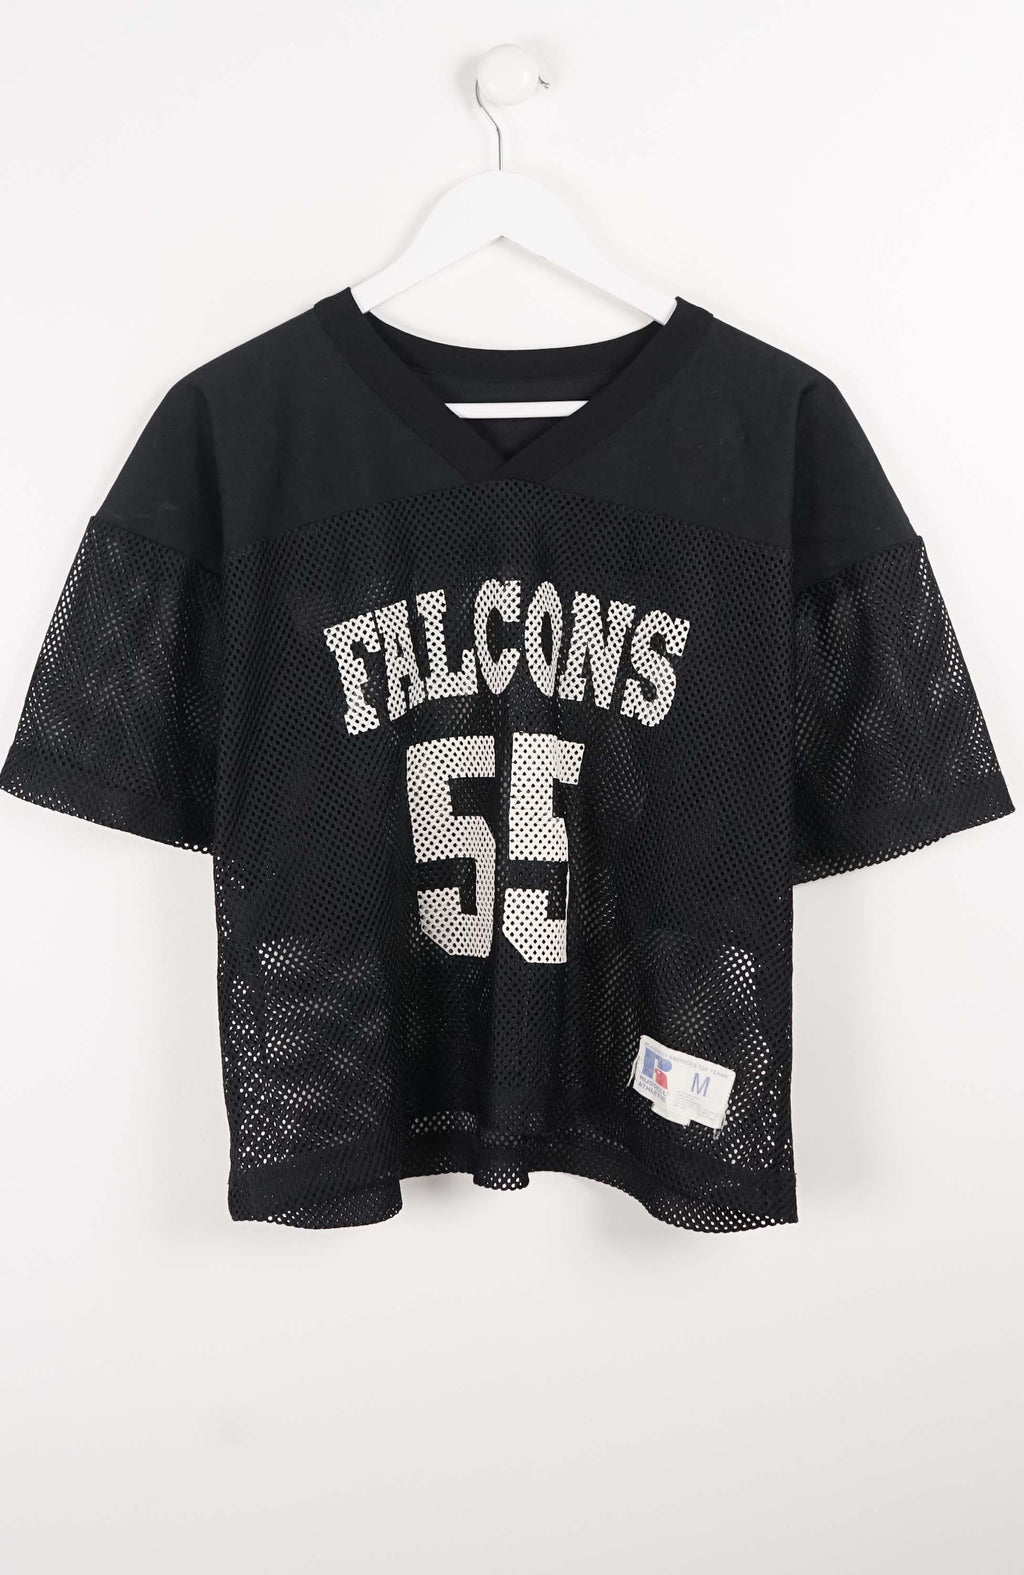 VINTAGE NFL FALCONS JERSEY (M) CROPPED